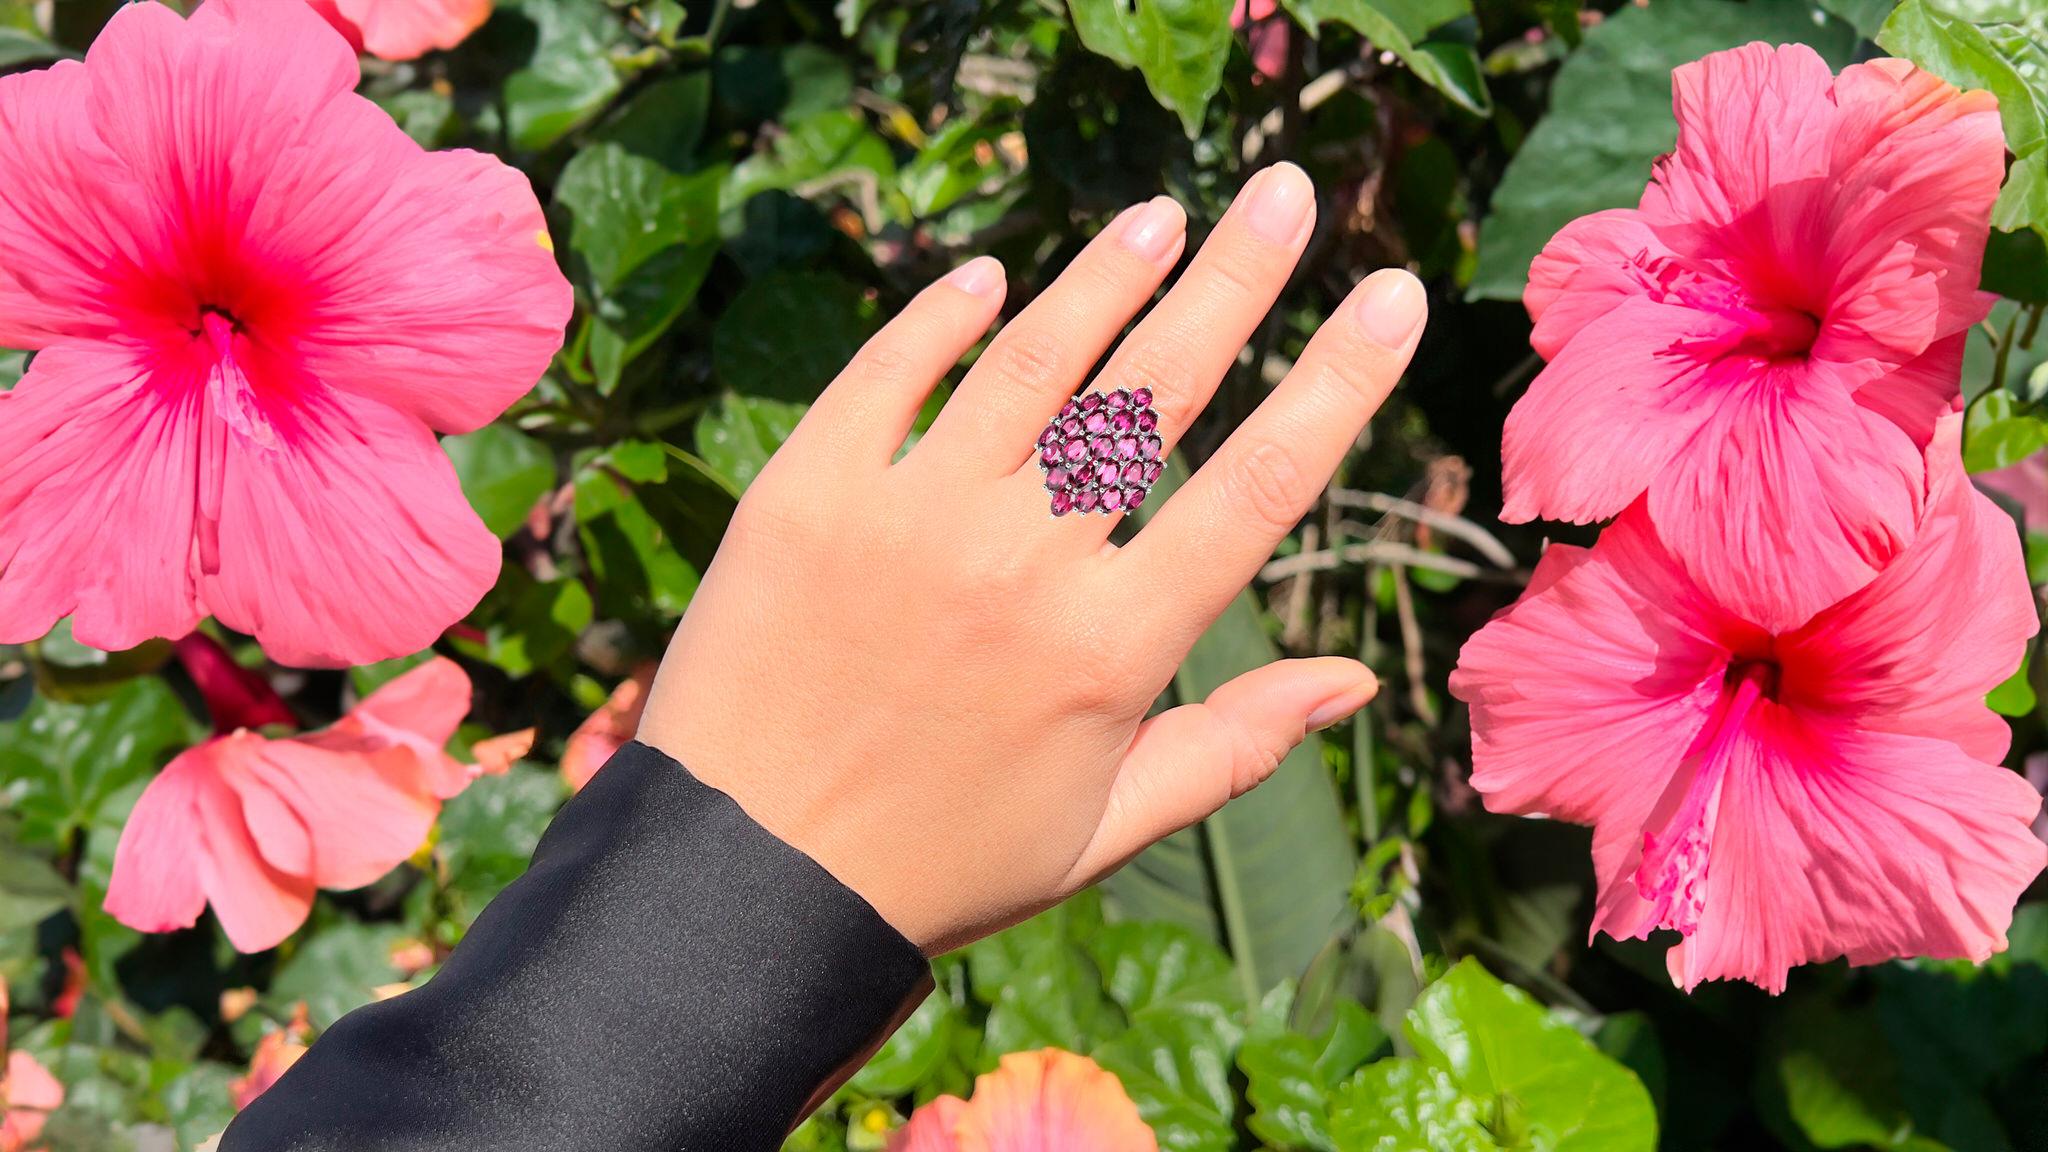 It comes with the Gemological Appraisal by GIA GG/AJP
All Gemstones are Natural
23 Rhodolites = 11.50 Carats
Metal: Rhodium Plated Sterling Silver
Ring Size: 8* US
*It can be resized complimentary